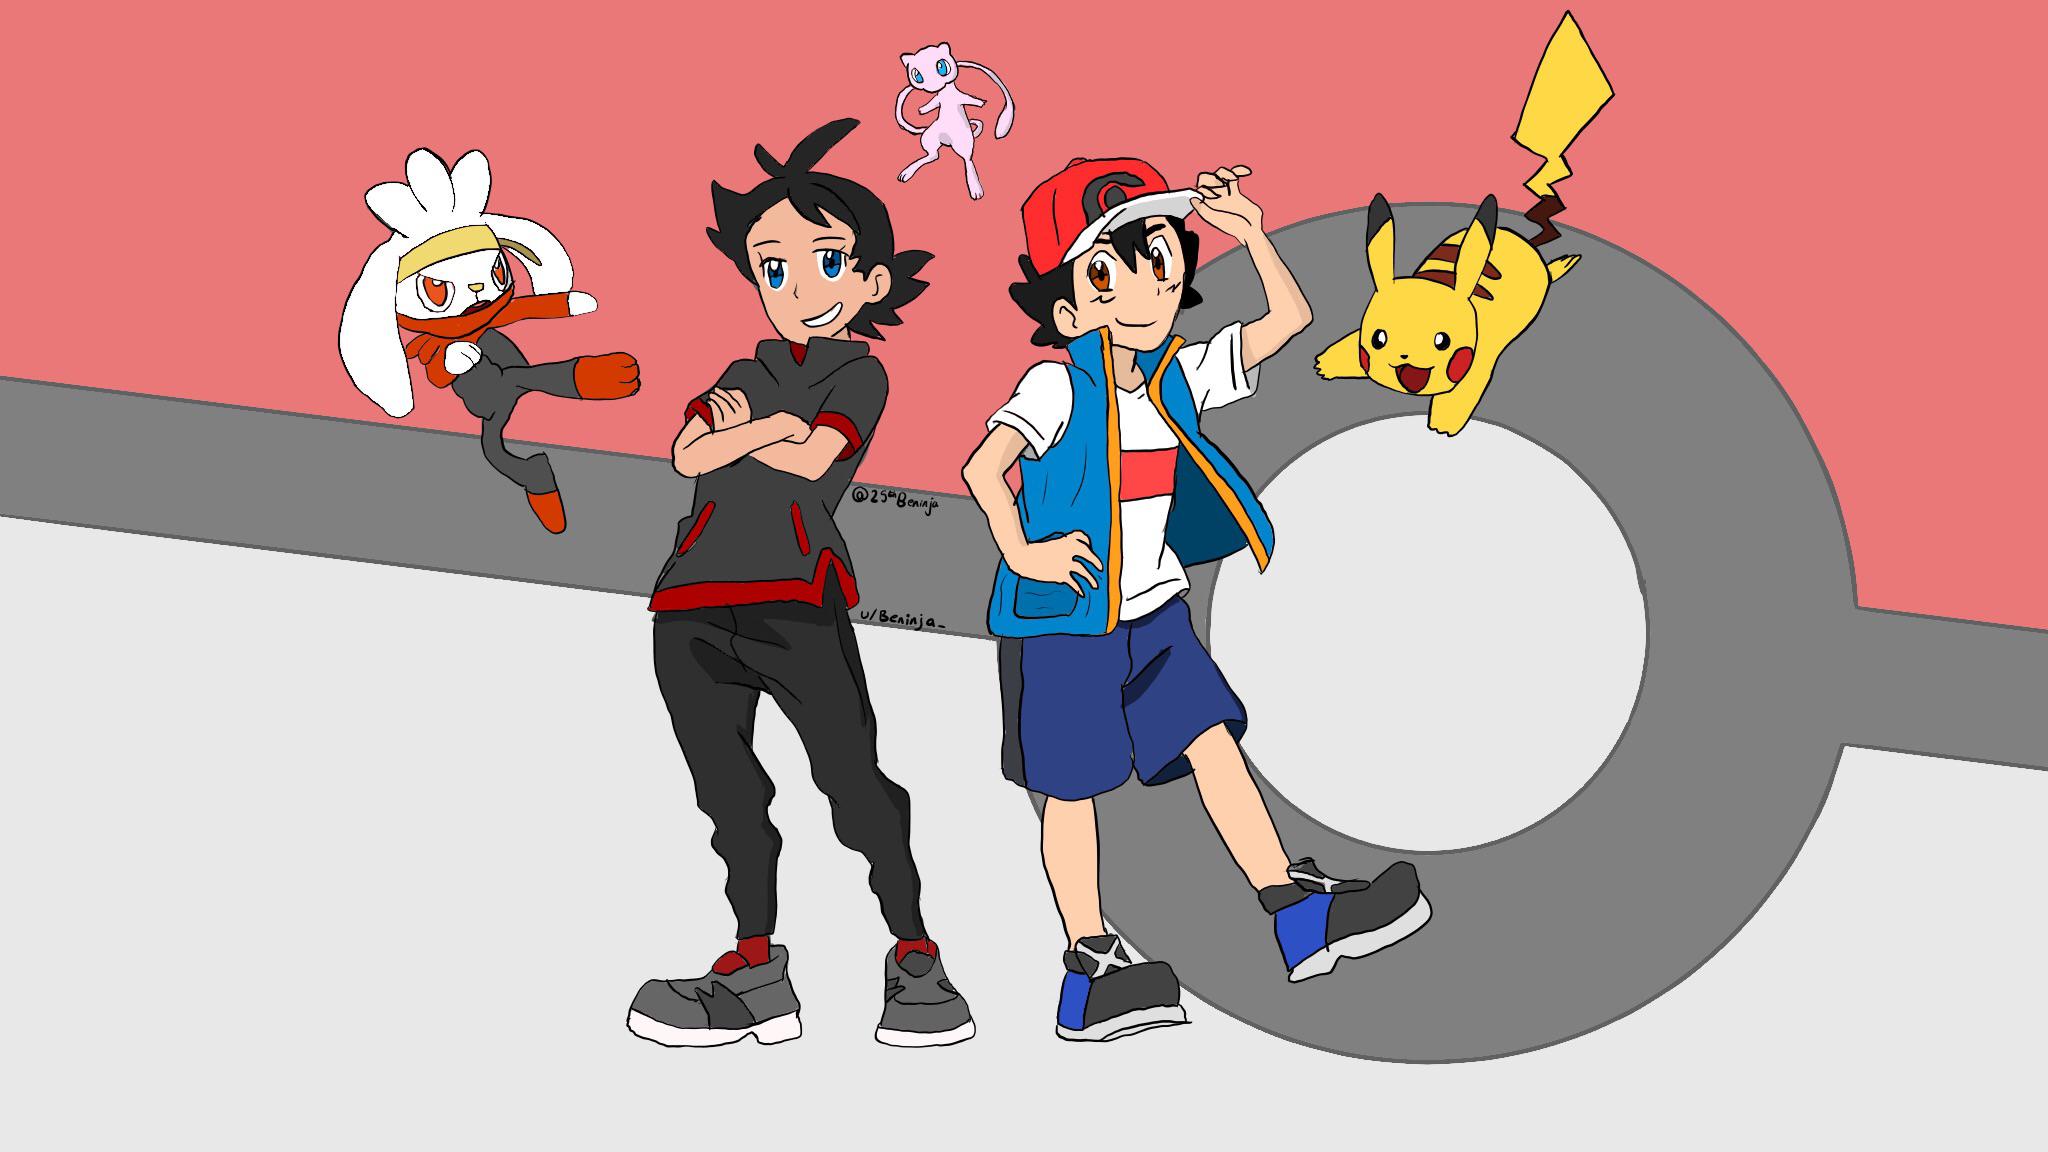 Another (OC) fanart! This time with Goh, Ash, Pikachu, Raboot and Mew